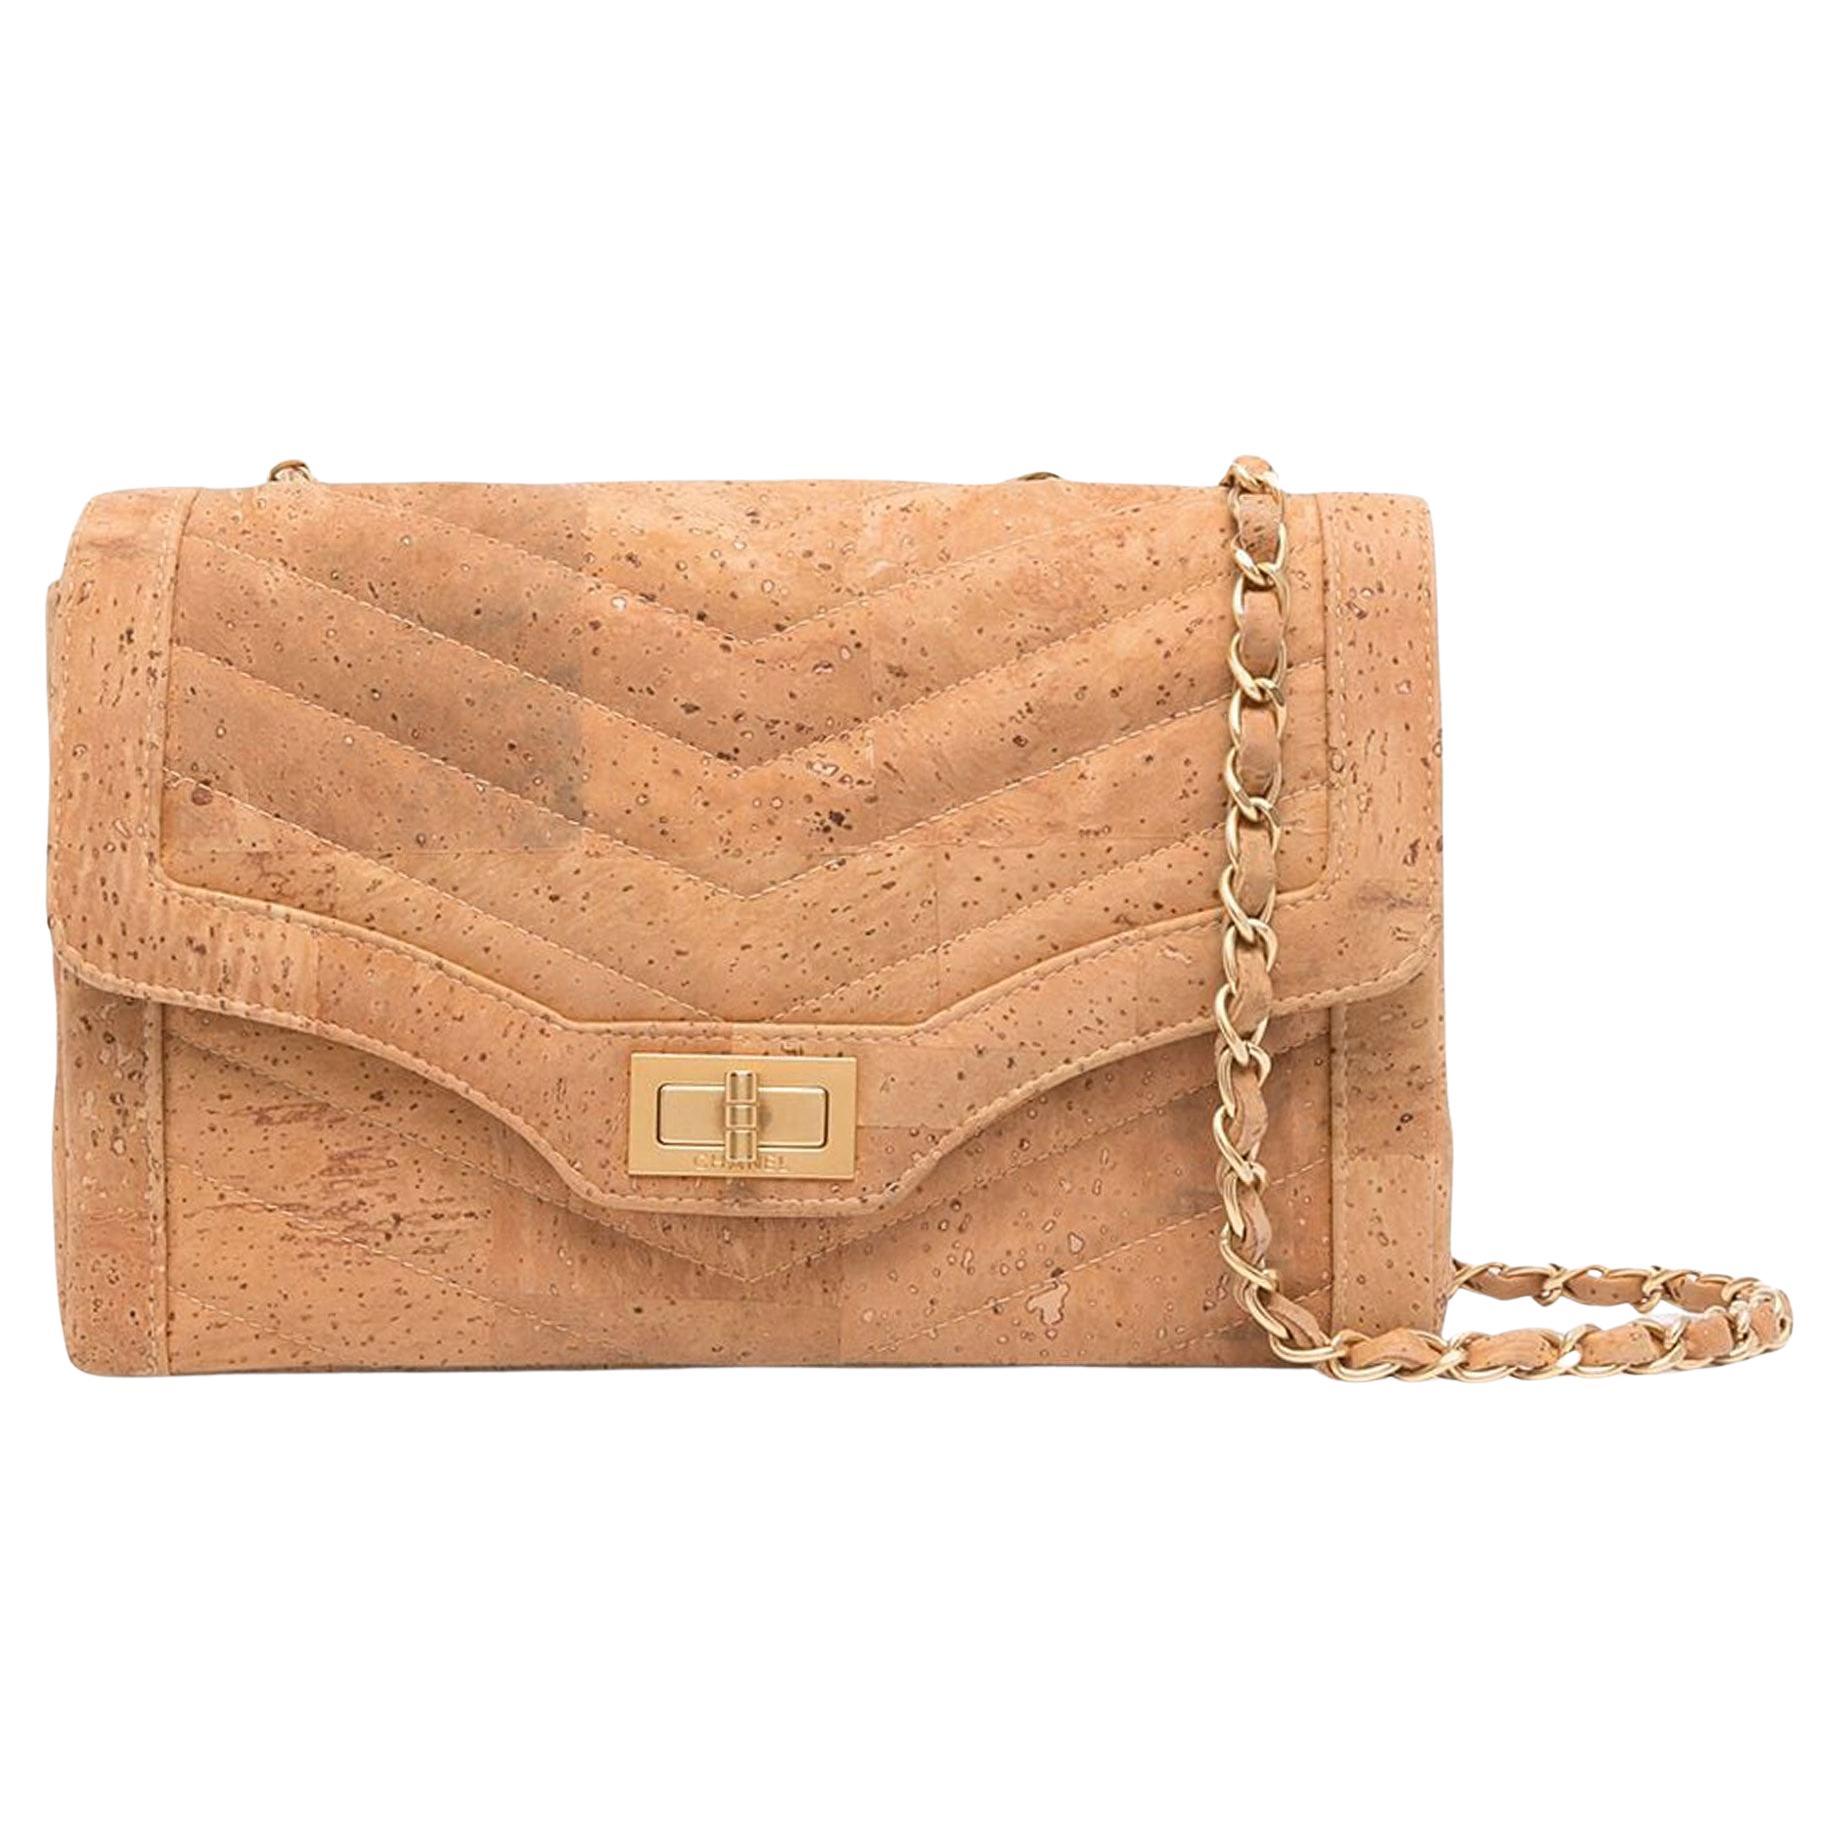 Chanel Rare 2001 Vintage Cork Chevron Quilted Reissue Classic Flap Bag For Sale